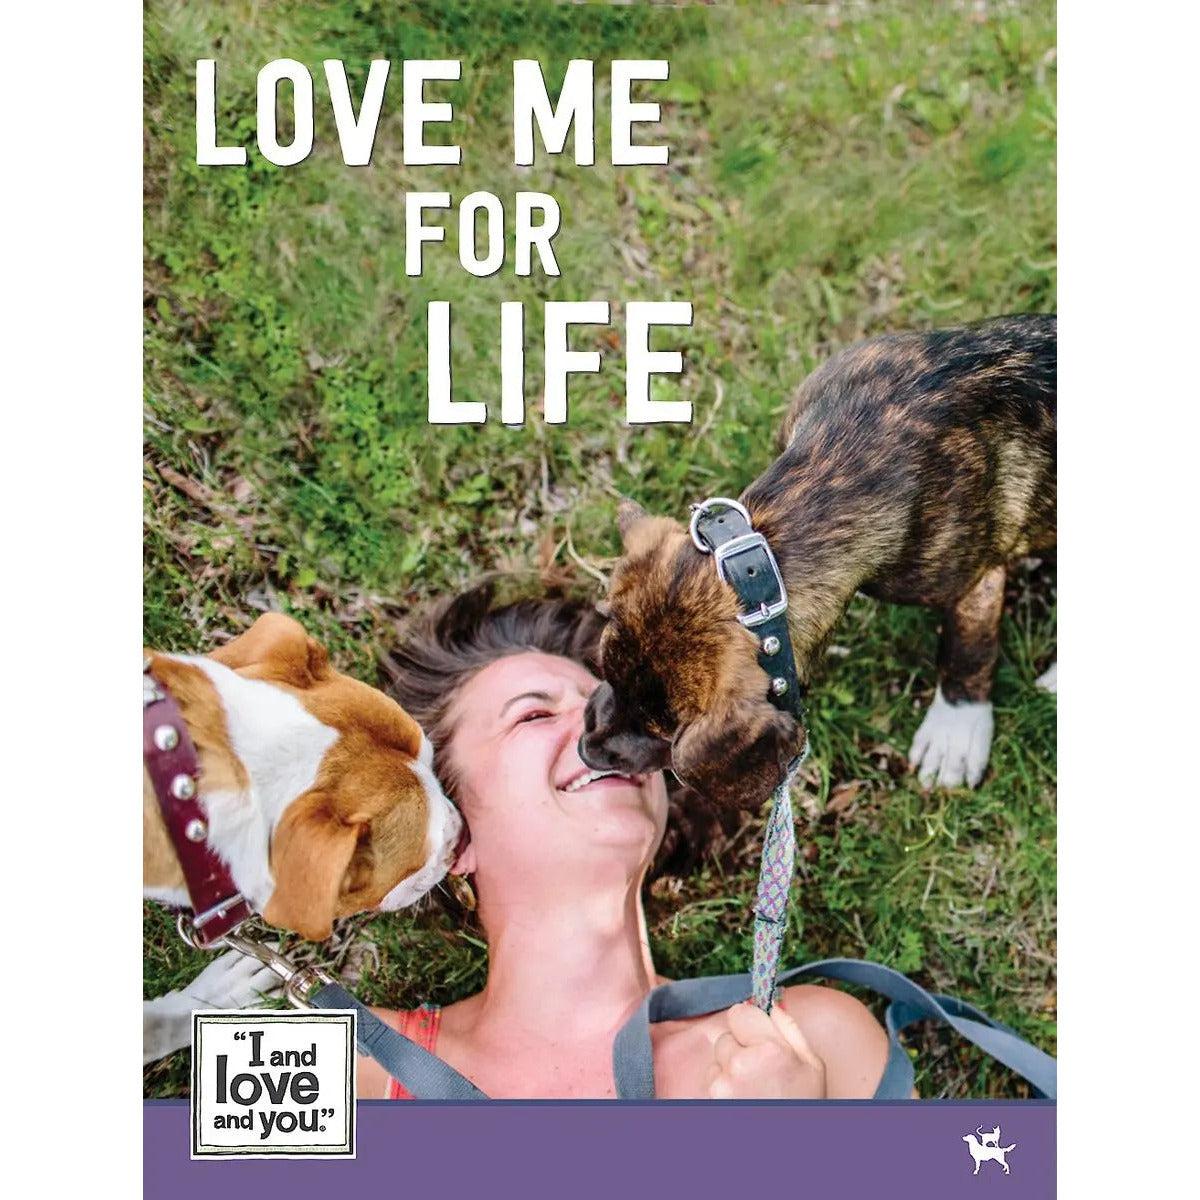 I and Love and You Nice Jerky Bites Chicken and Salmon Grain-Free Dog Treats Talis Us